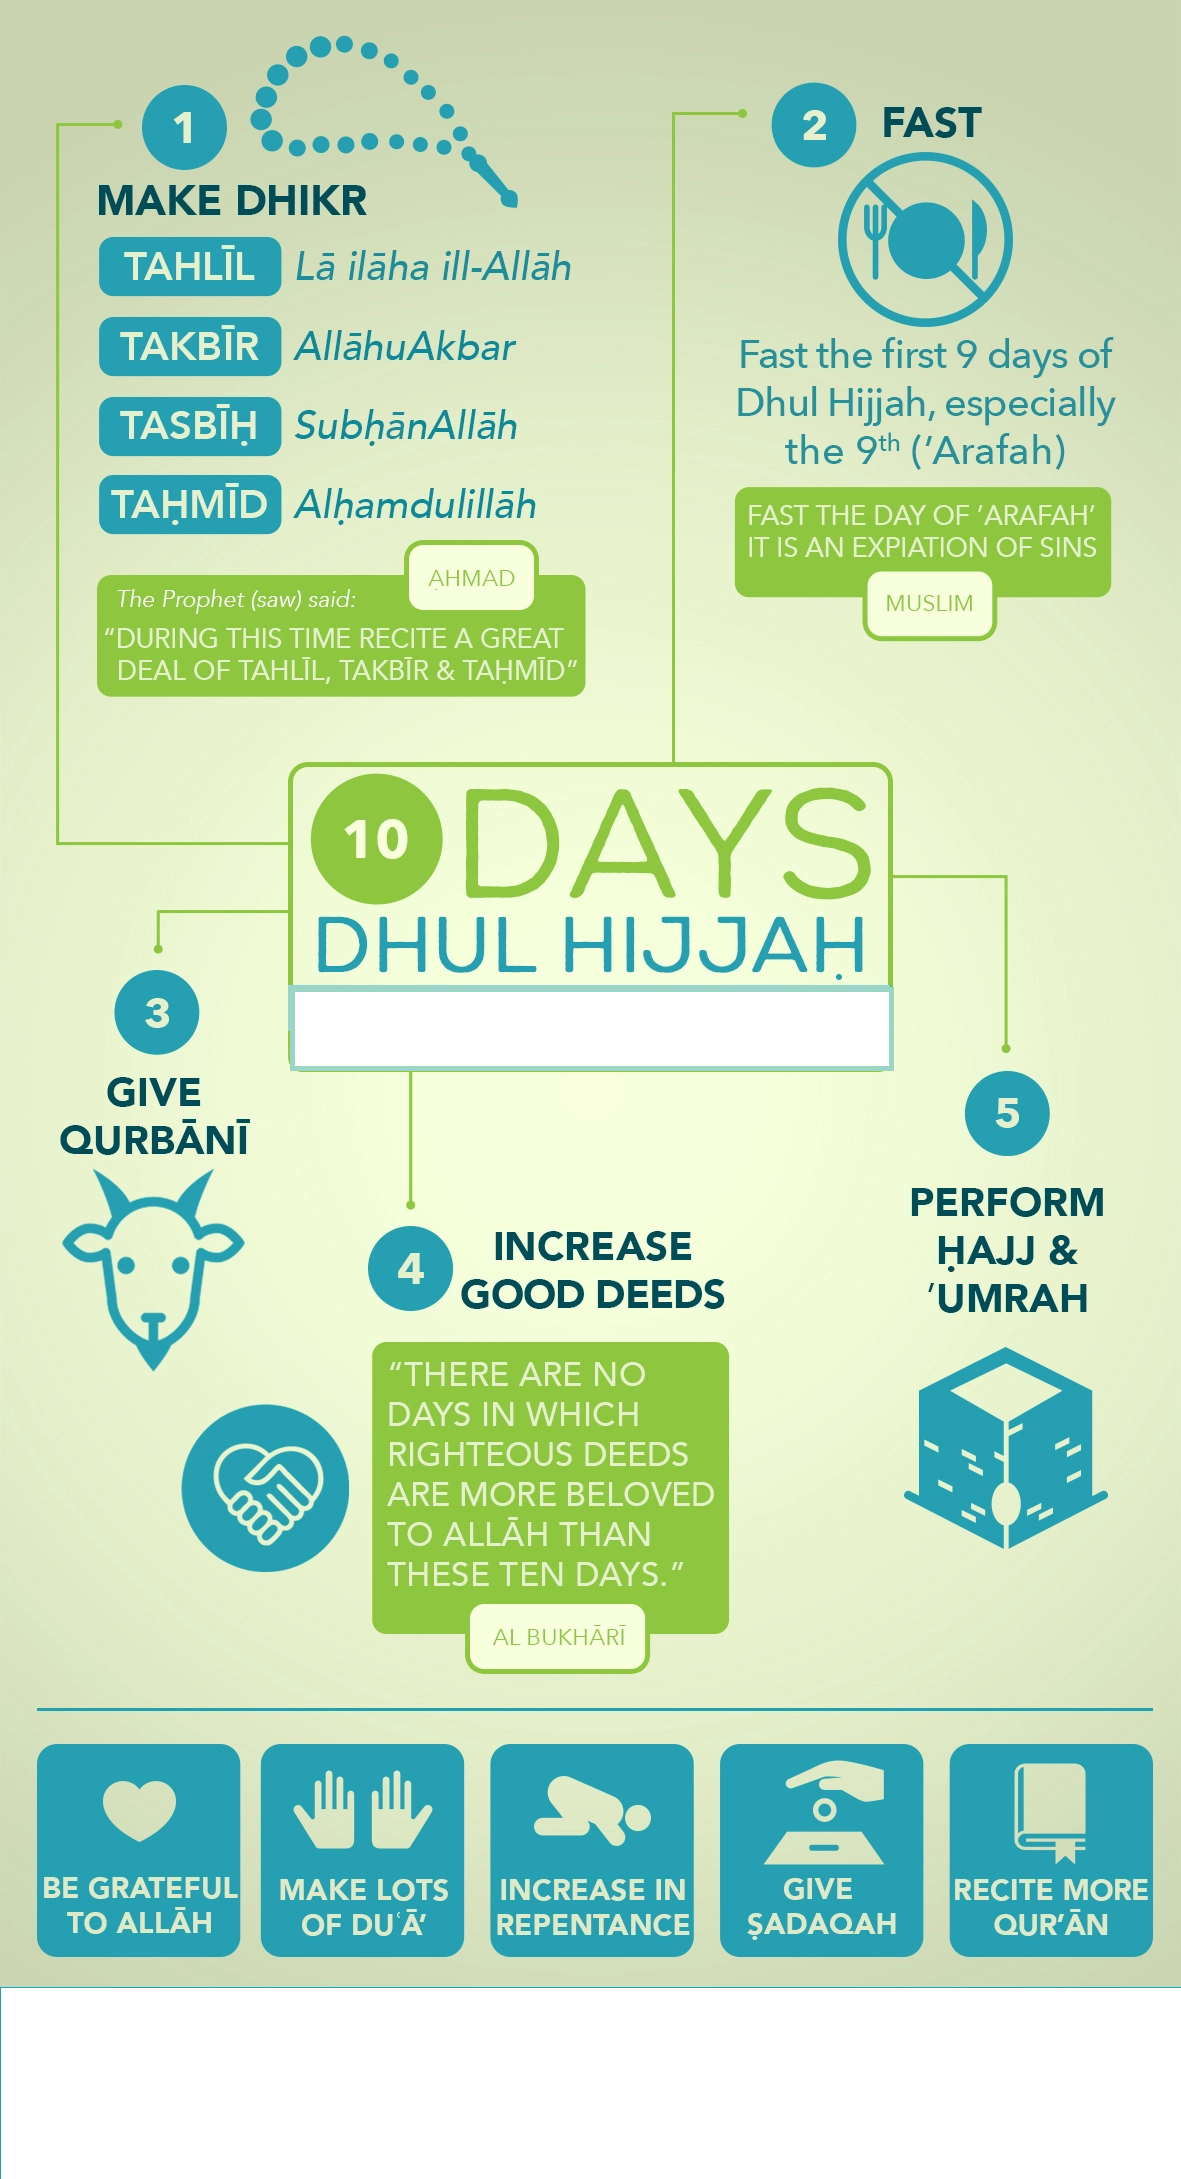 The Blessed First 10 Days of Dhu Al-Hijjah